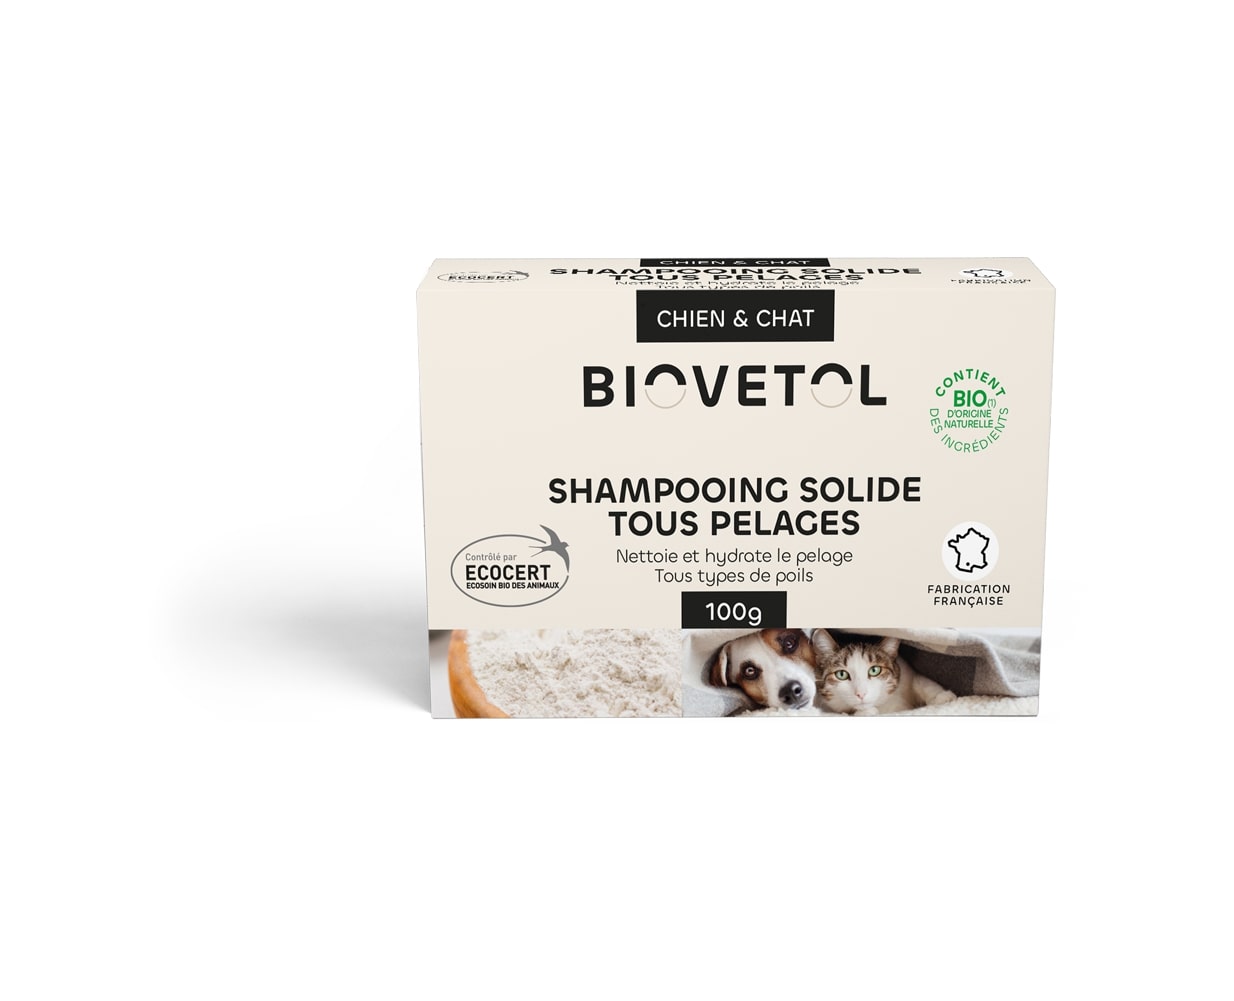 Shampoing solide tous pelages bio